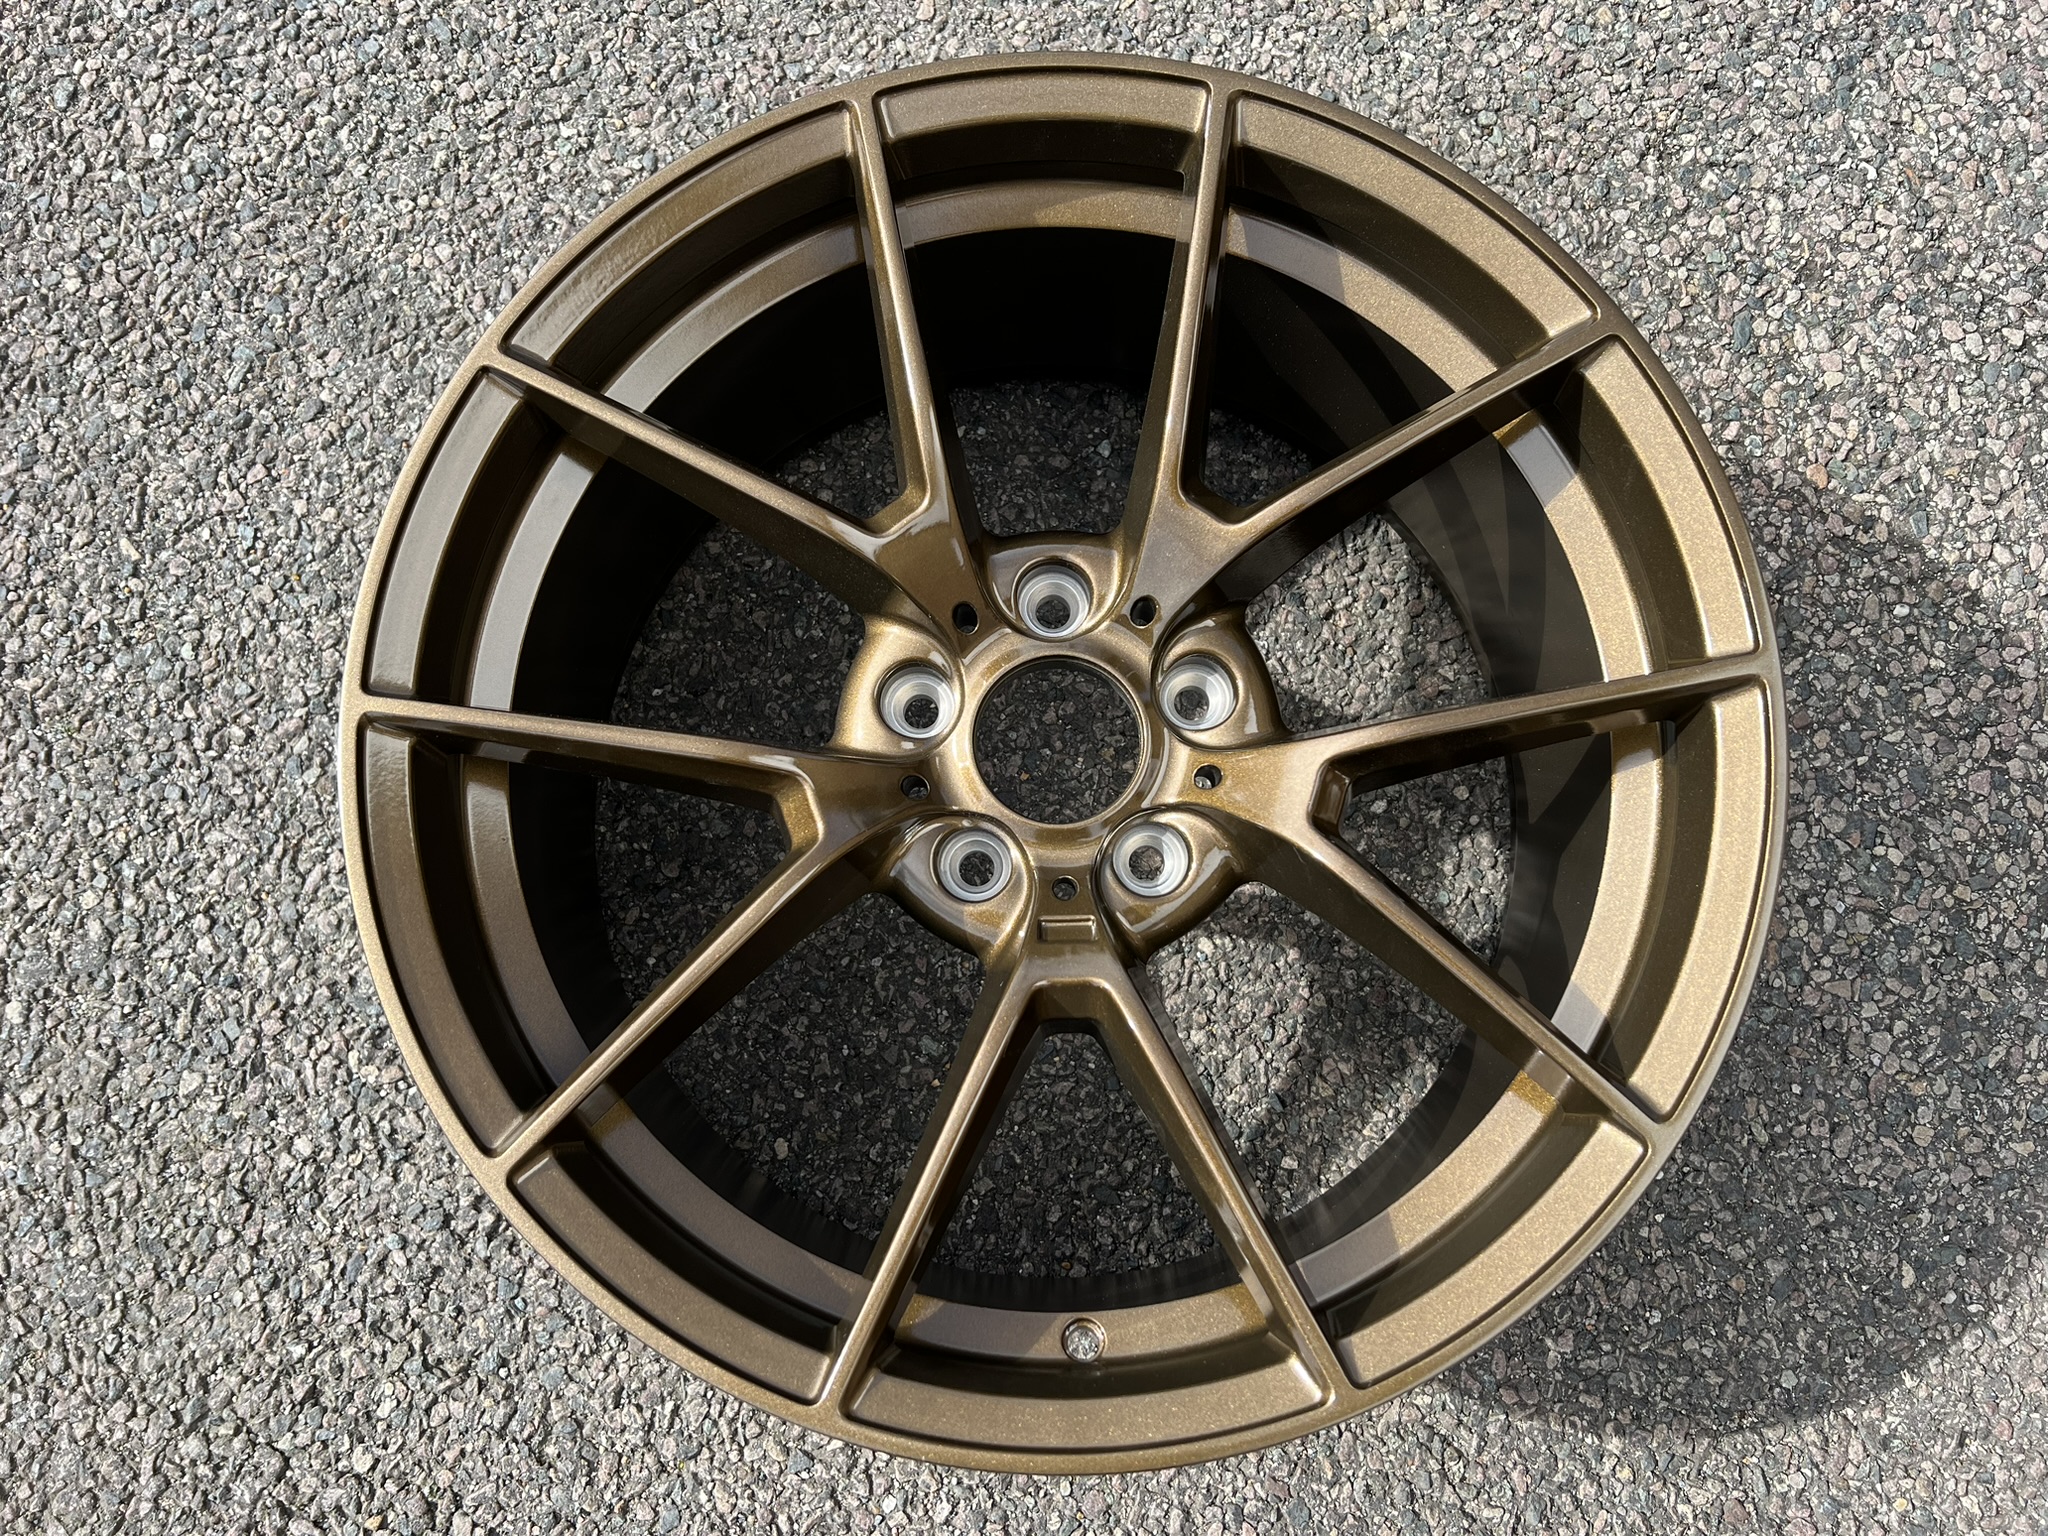 NEW 19" CS STYLE ALLOY WHEELS IN GLOSS BRONZE, WIDER 9.5" REAR